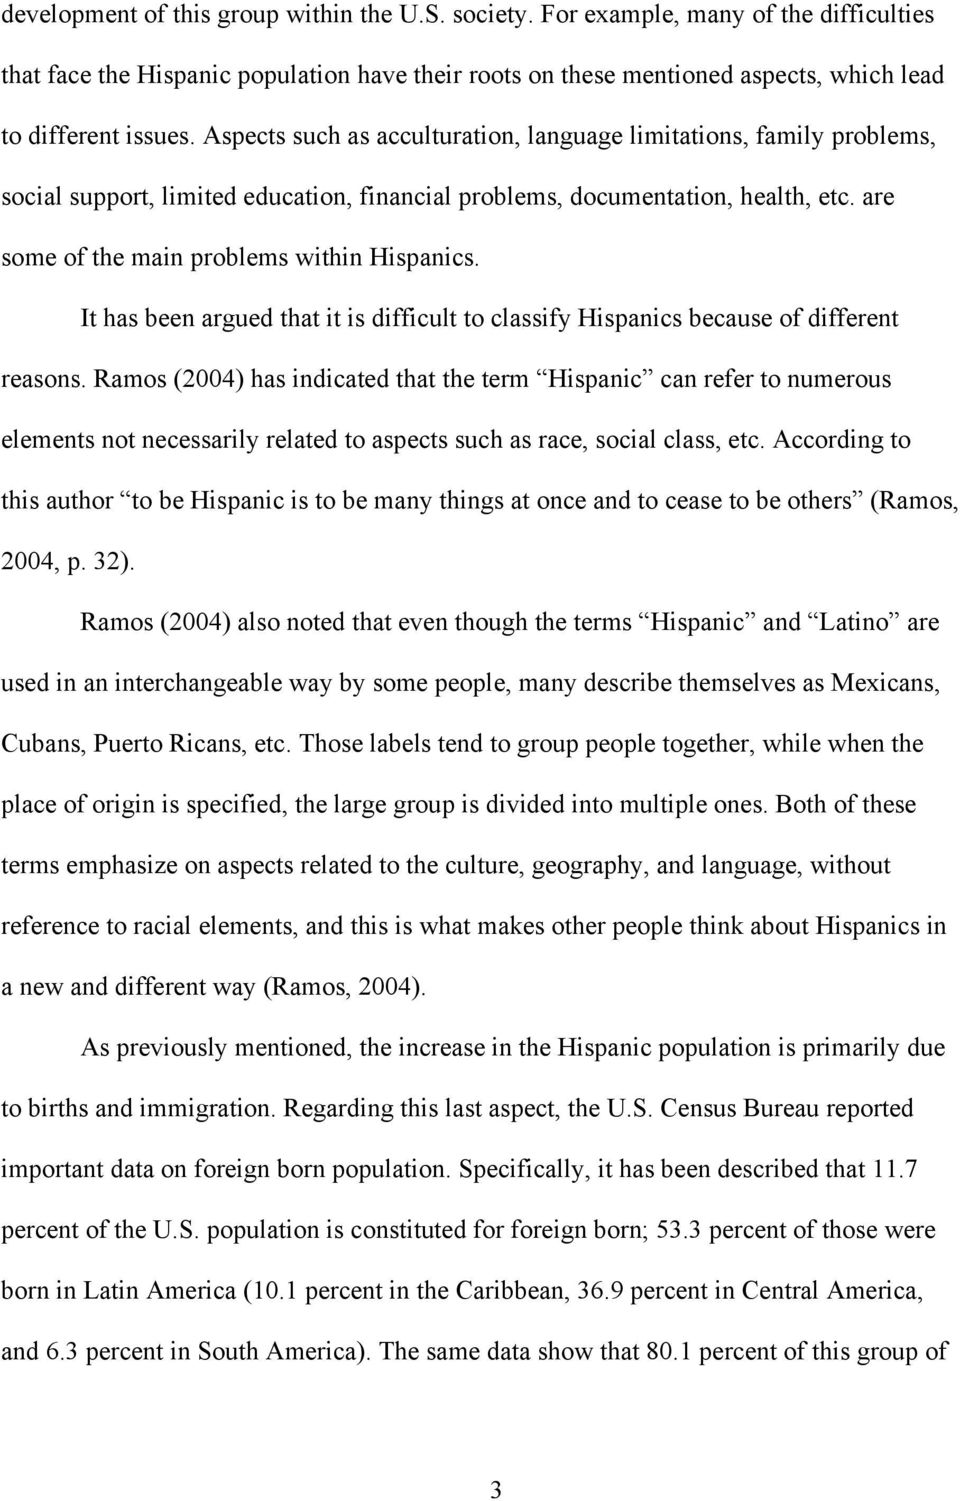 It has been argued that it is difficult to classify Hispanics because of different reasons.